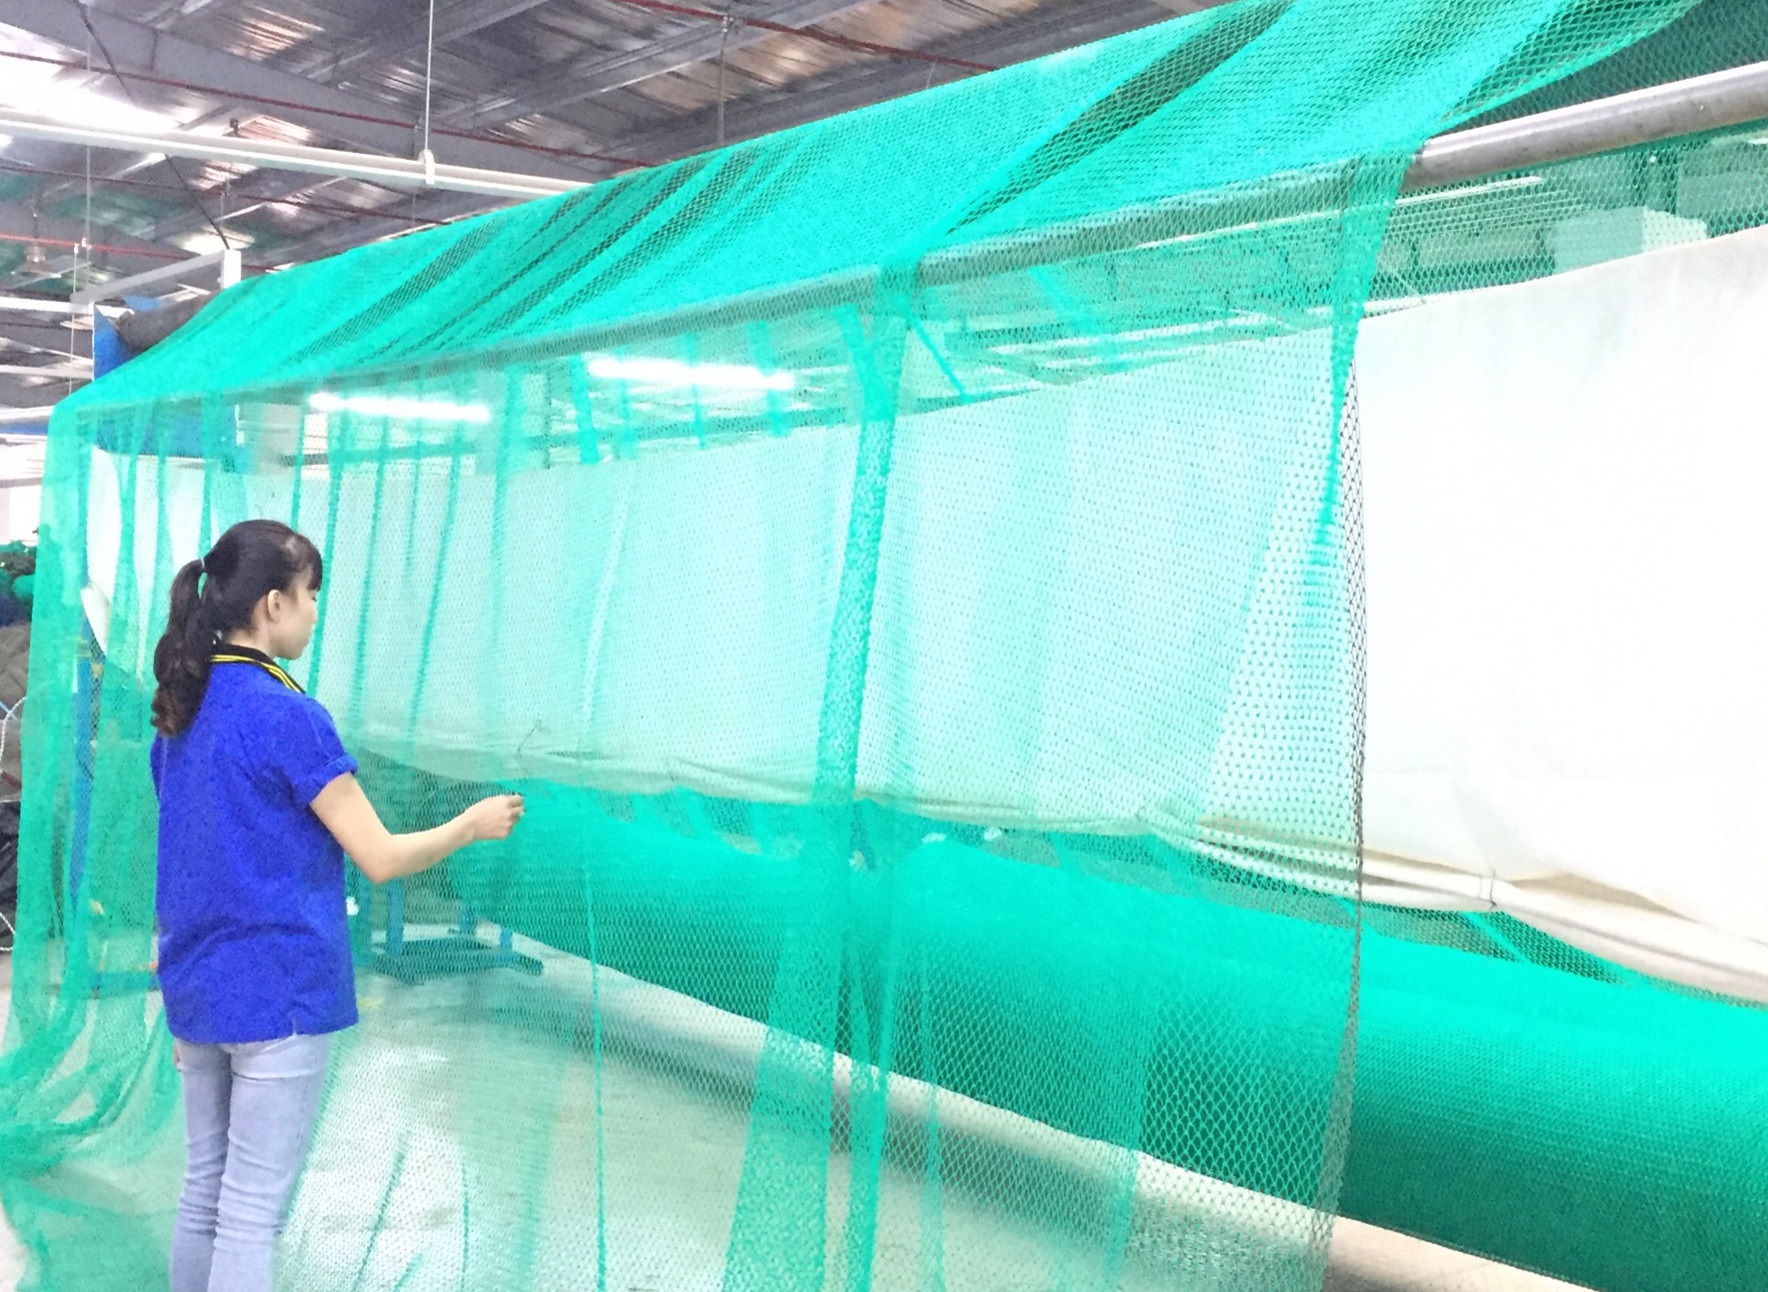 Manufacturing process of netting